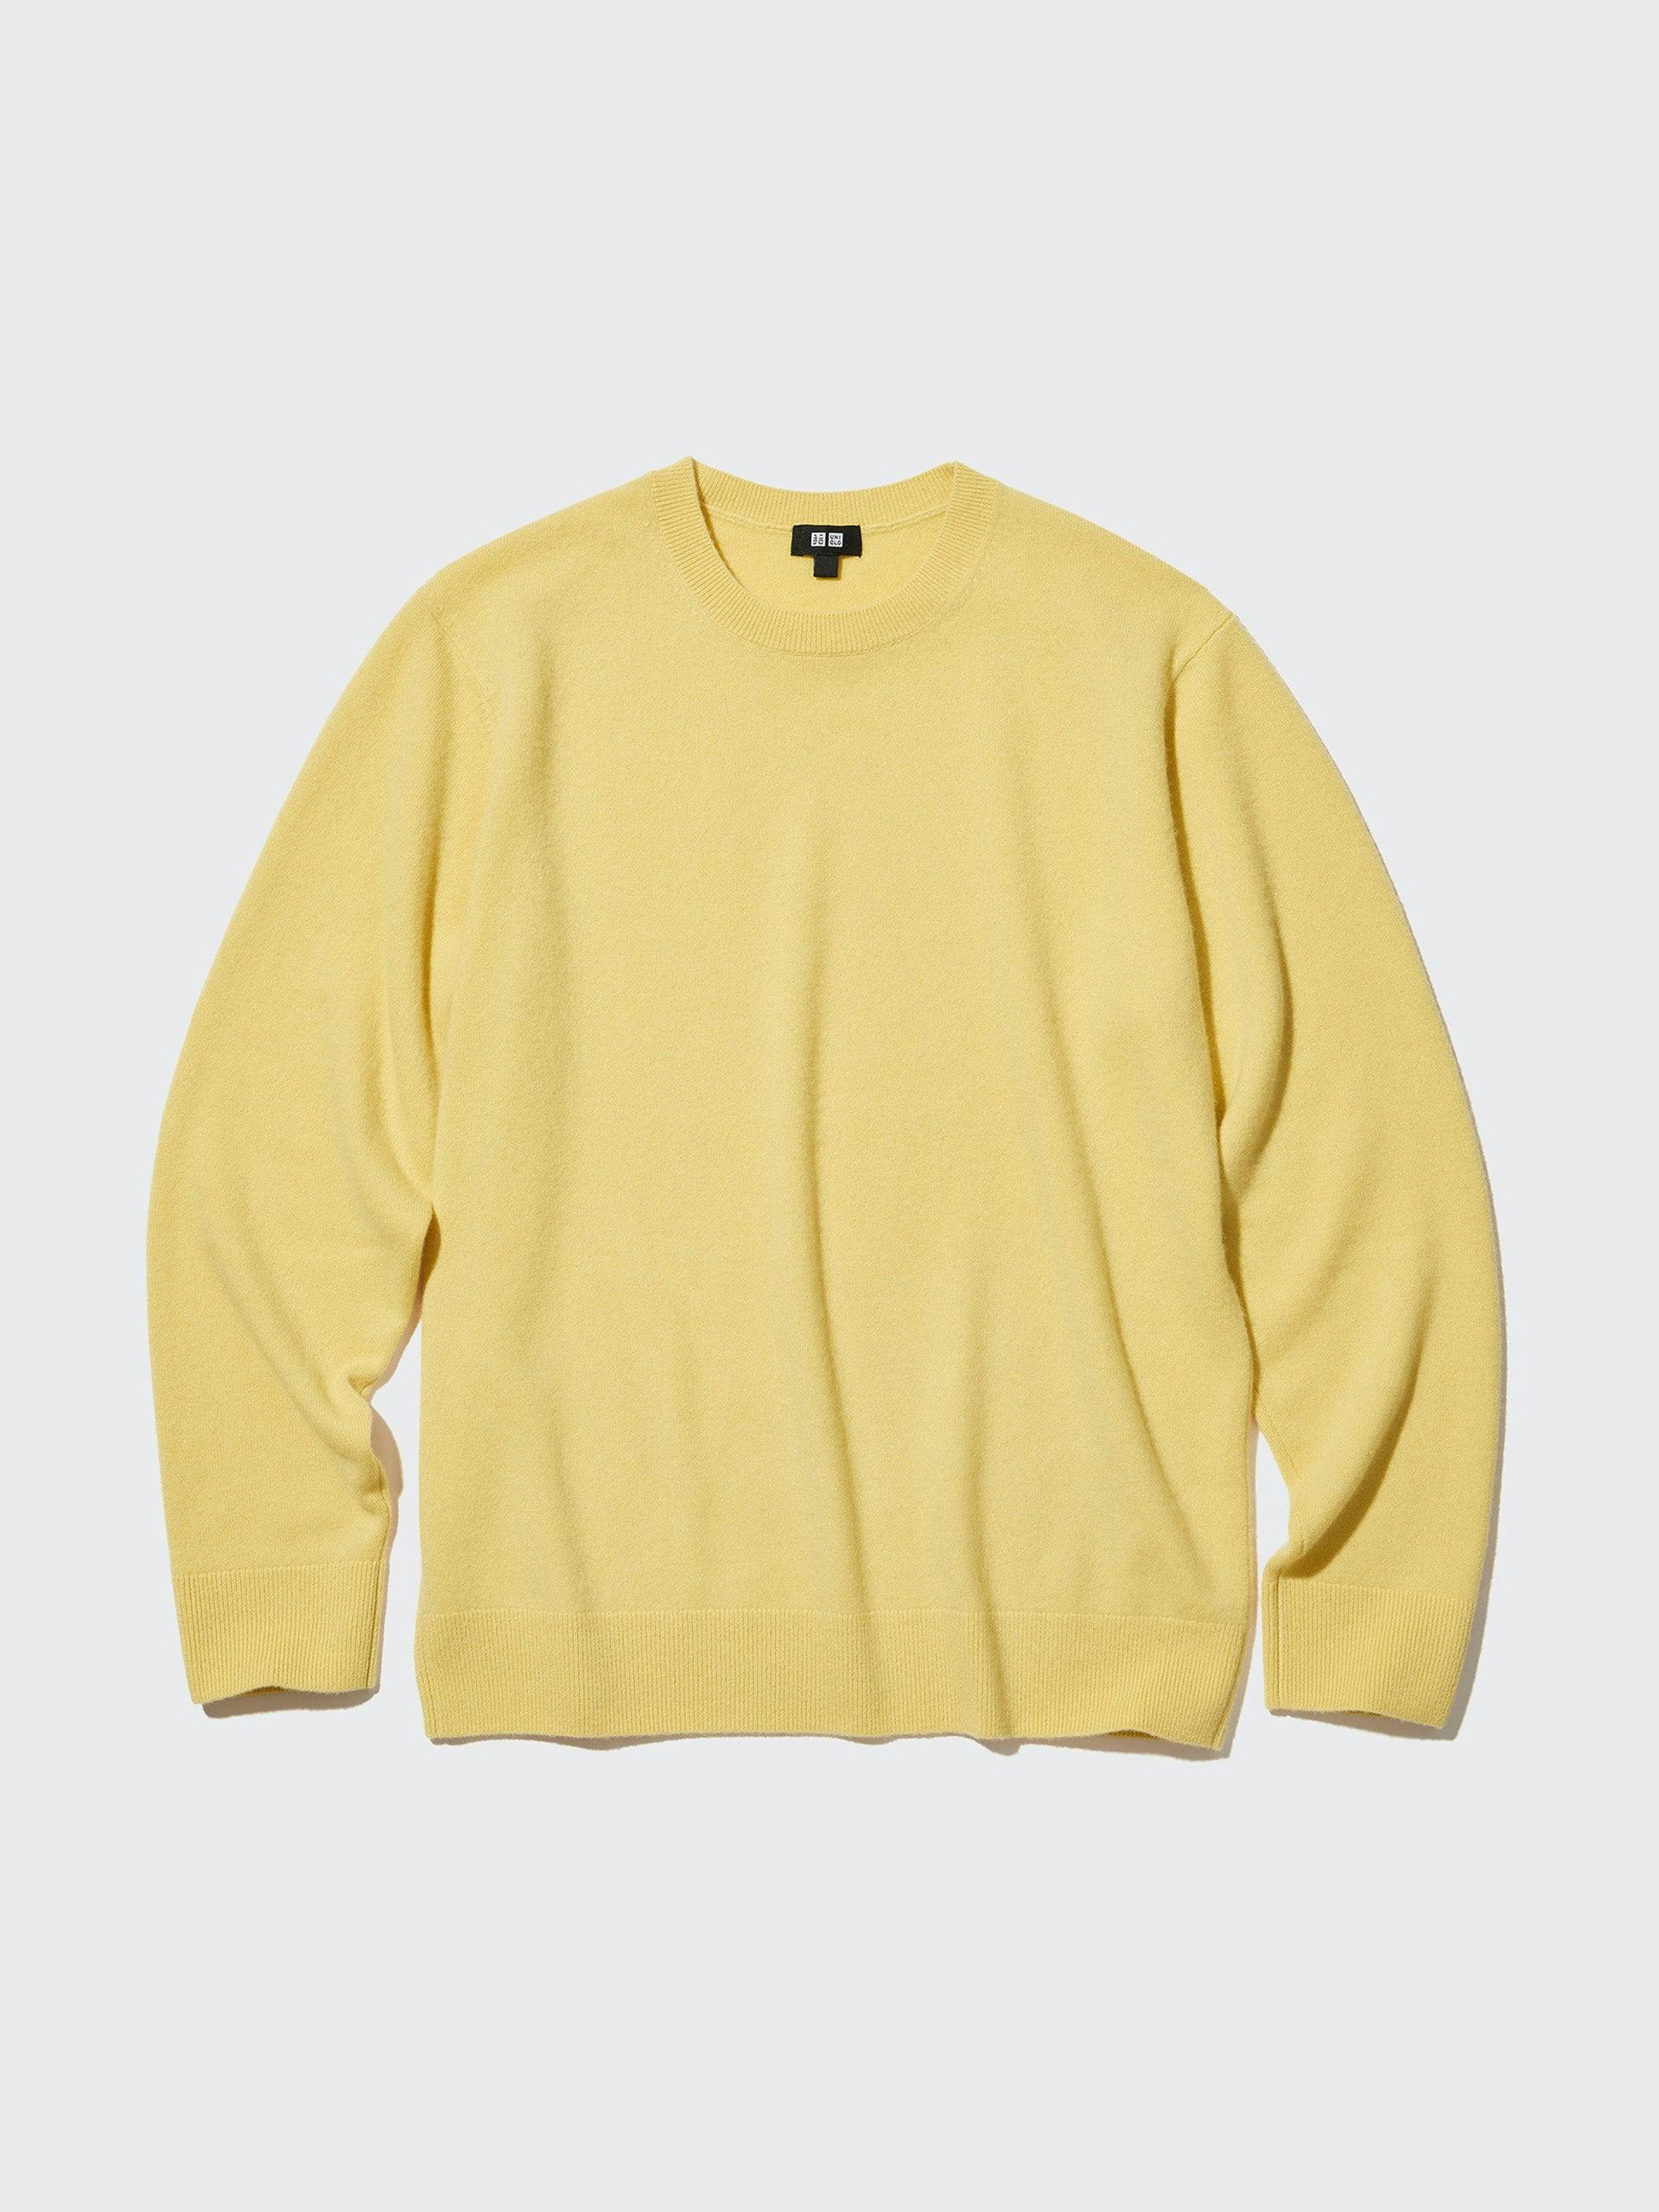 Cashmere jumper in yellow